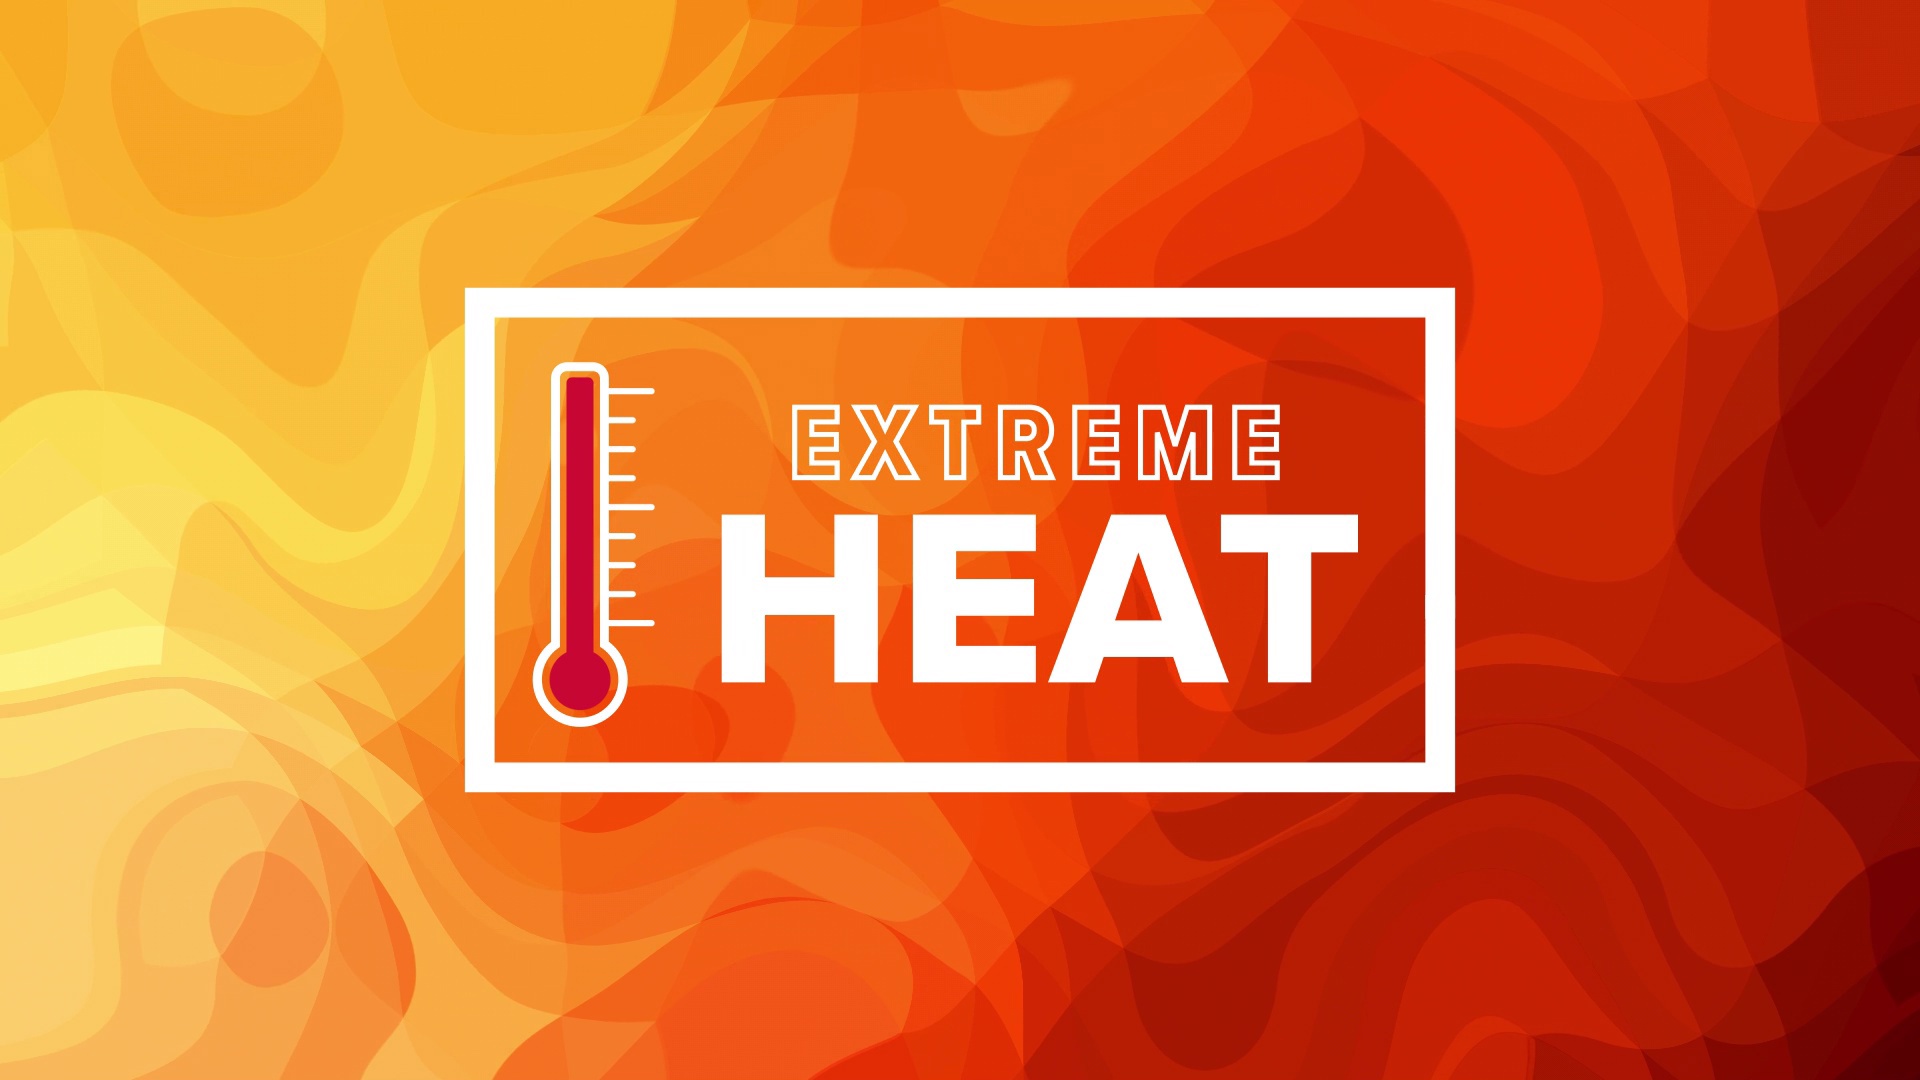 The high heat is expected to stick around through the end of the week.  That can pose health risks for people, especially seniors and young children.